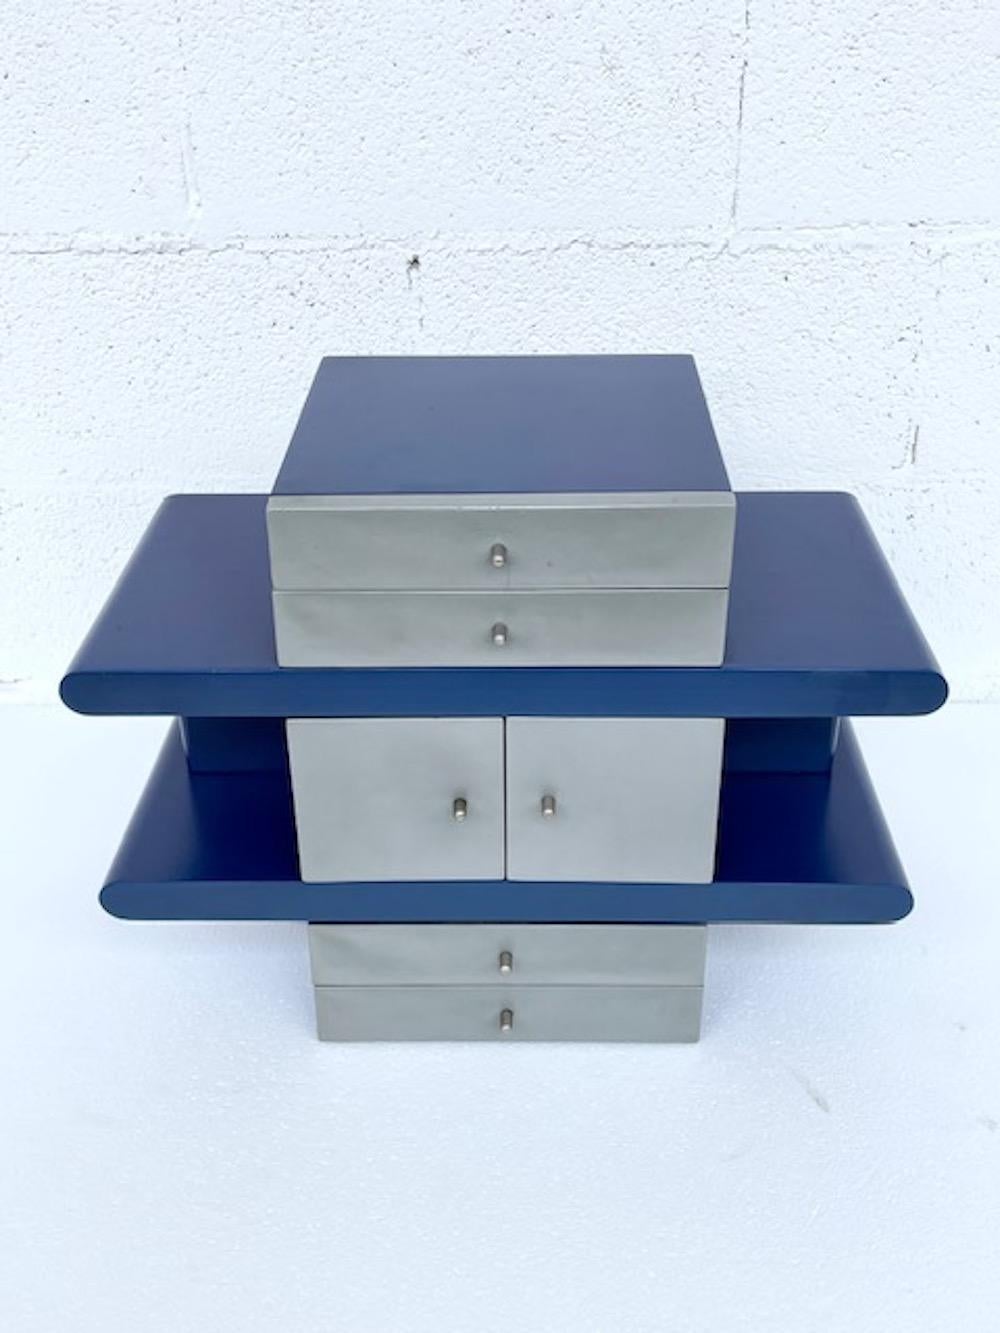 Designed by Hans von Klier for Planula Agliana Manufacturing. Jewelry case Scricciolo model. 
Original jewelry box with a refined and innovative design. The structure is in wood painted in shades of blue and satin silver. Small drawers allow the